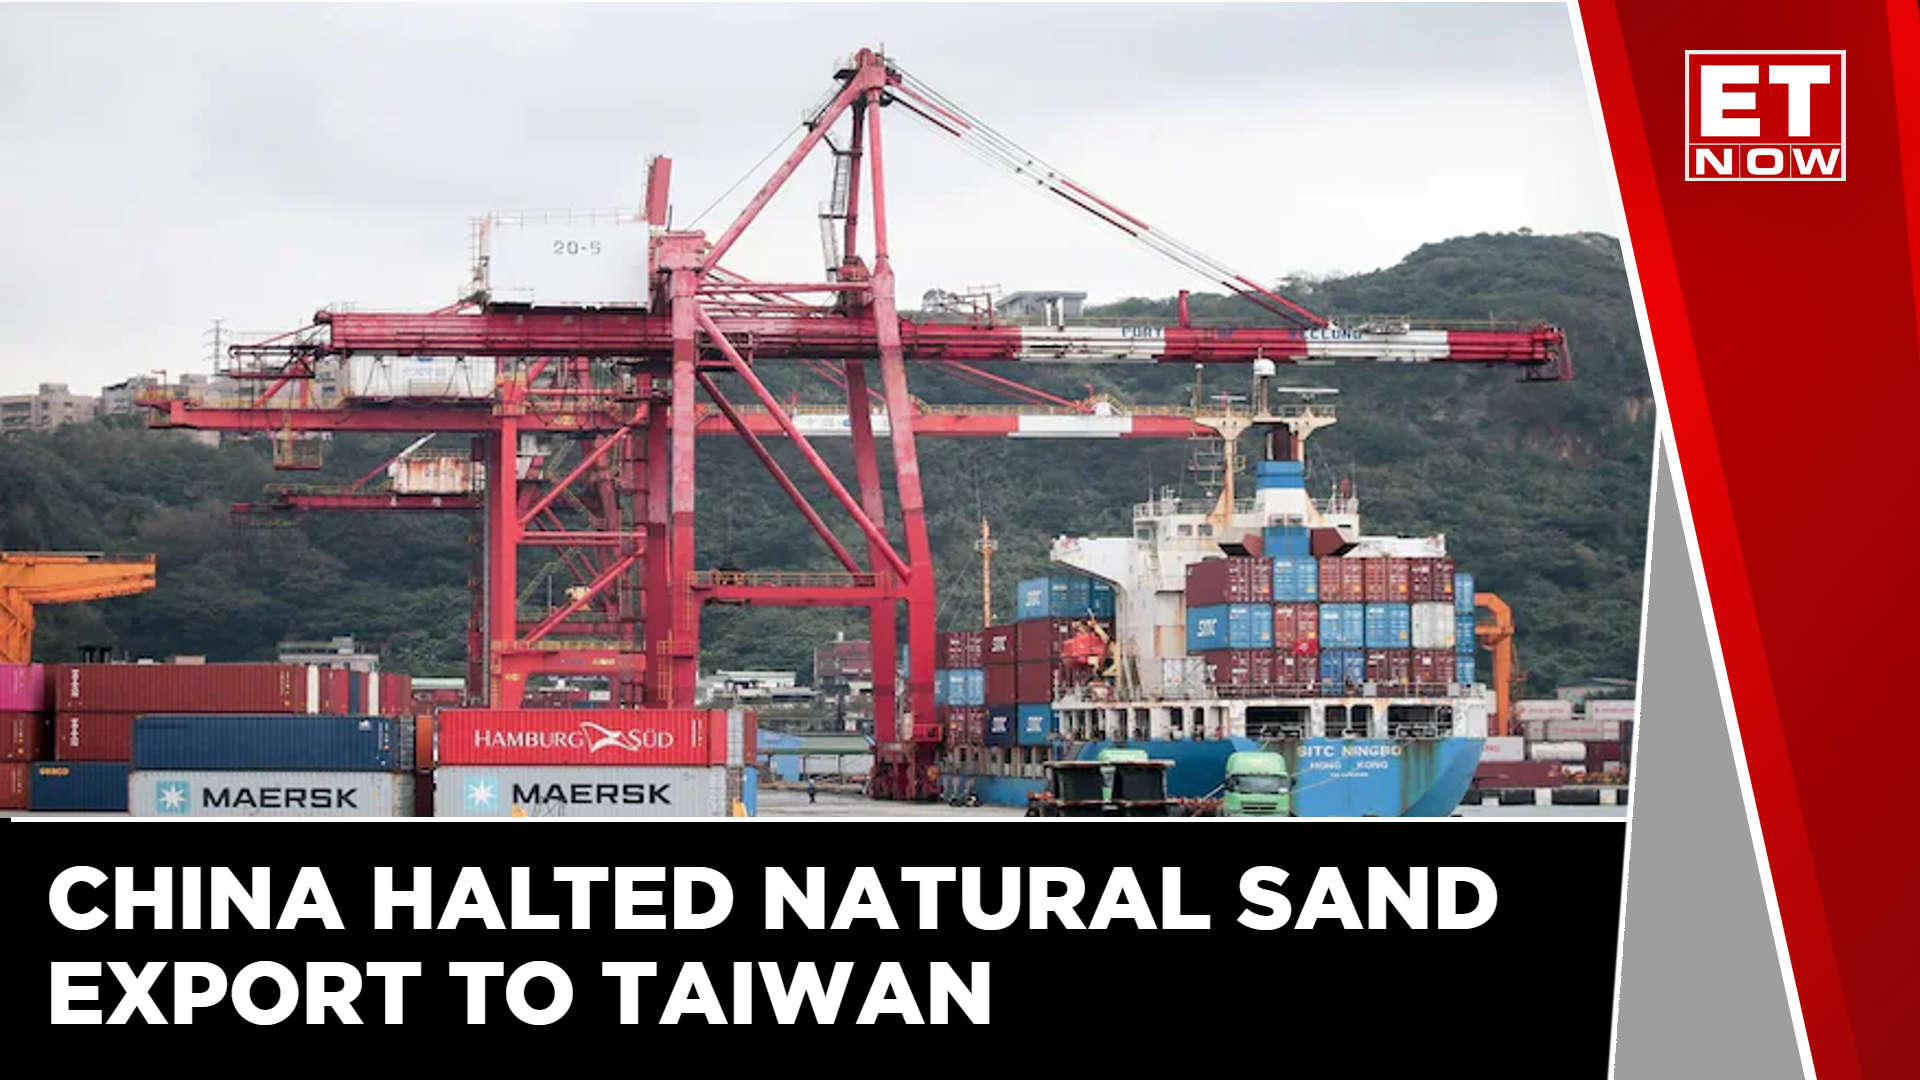 How did China affect the Indian auto industry by banning sand exports to Taiwan?